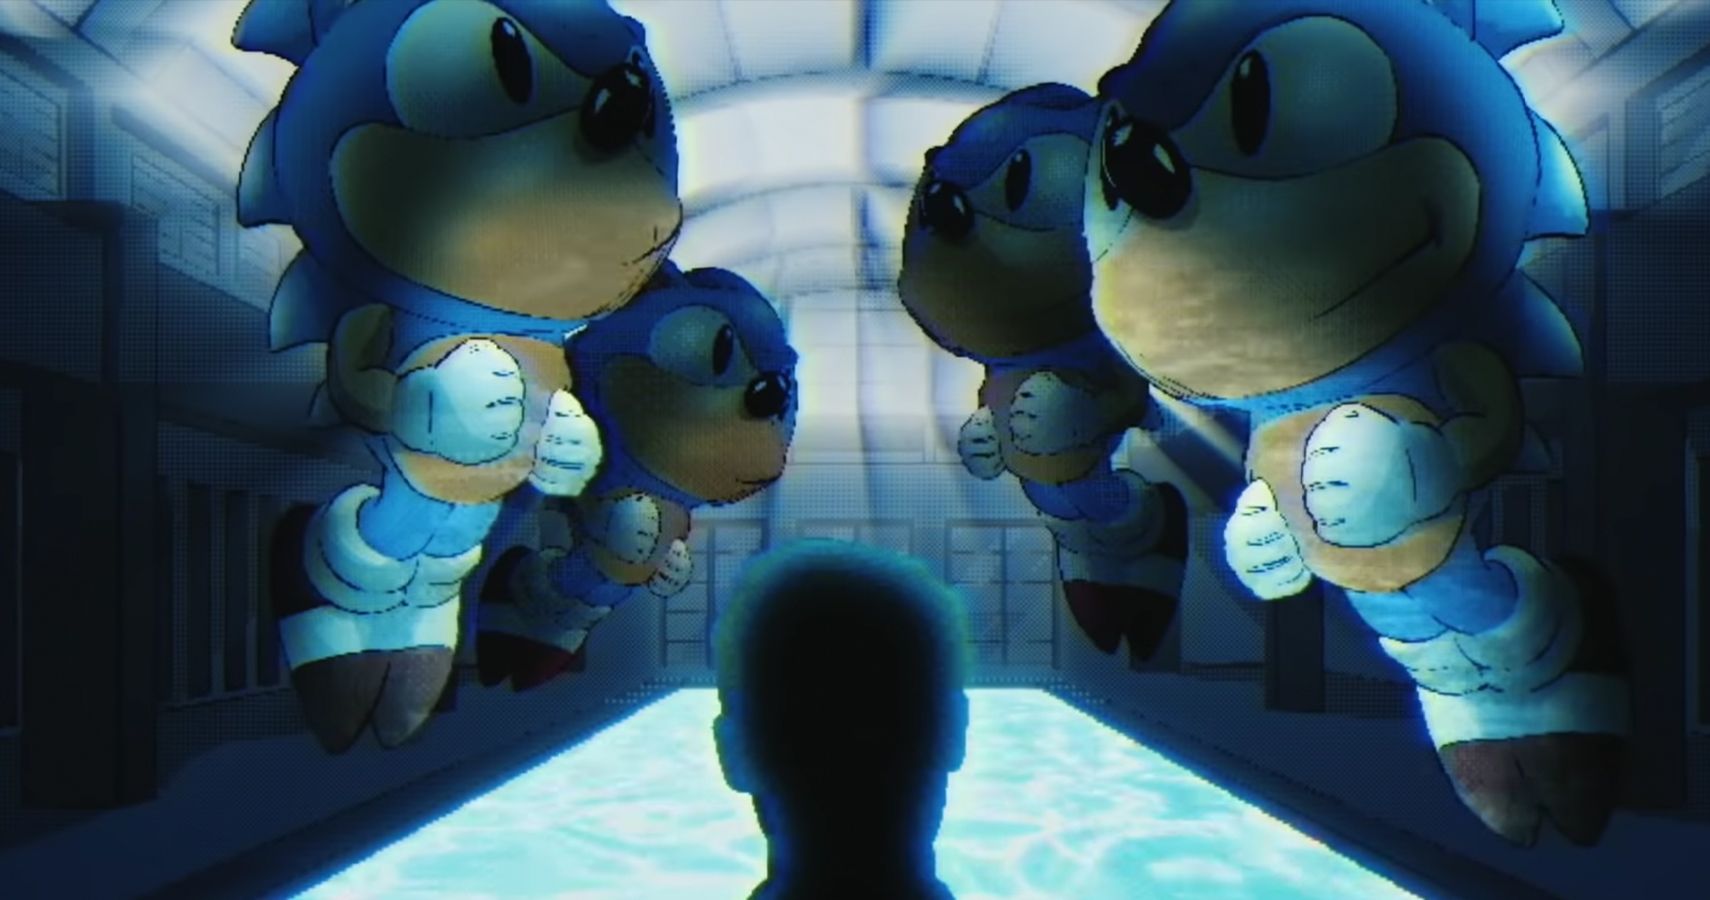 Sonic the Hedgehog balloons float over a pool as a shadowy figure looks on.